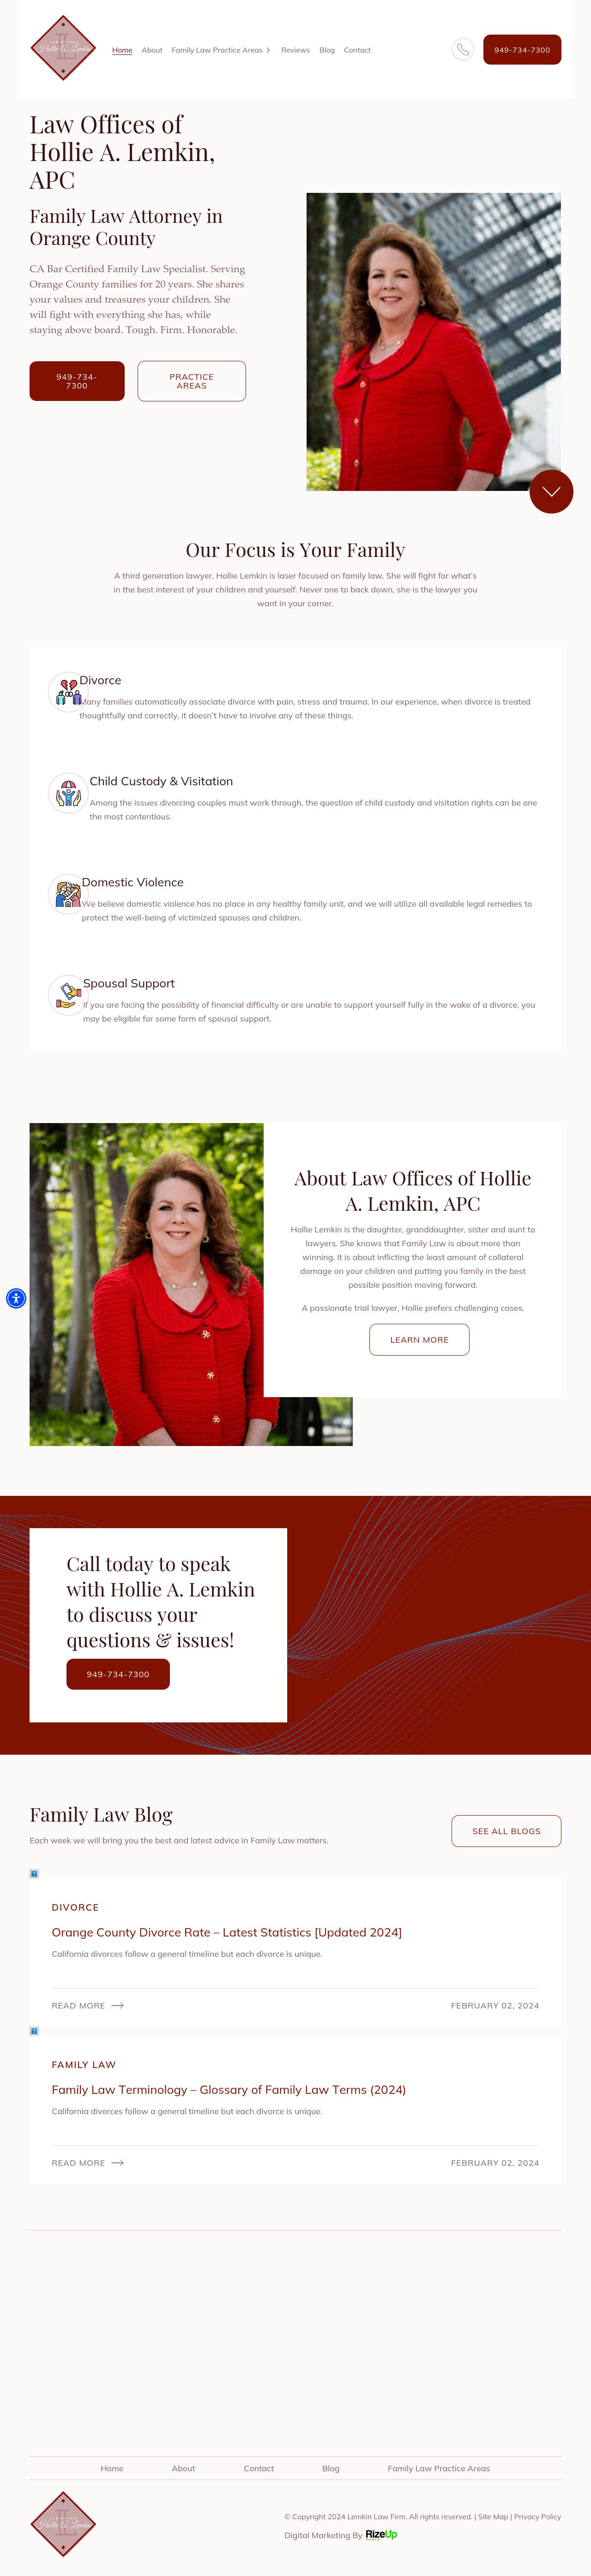 Law Offices of Hollie A. Lemkin - Irvine CA Lawyers